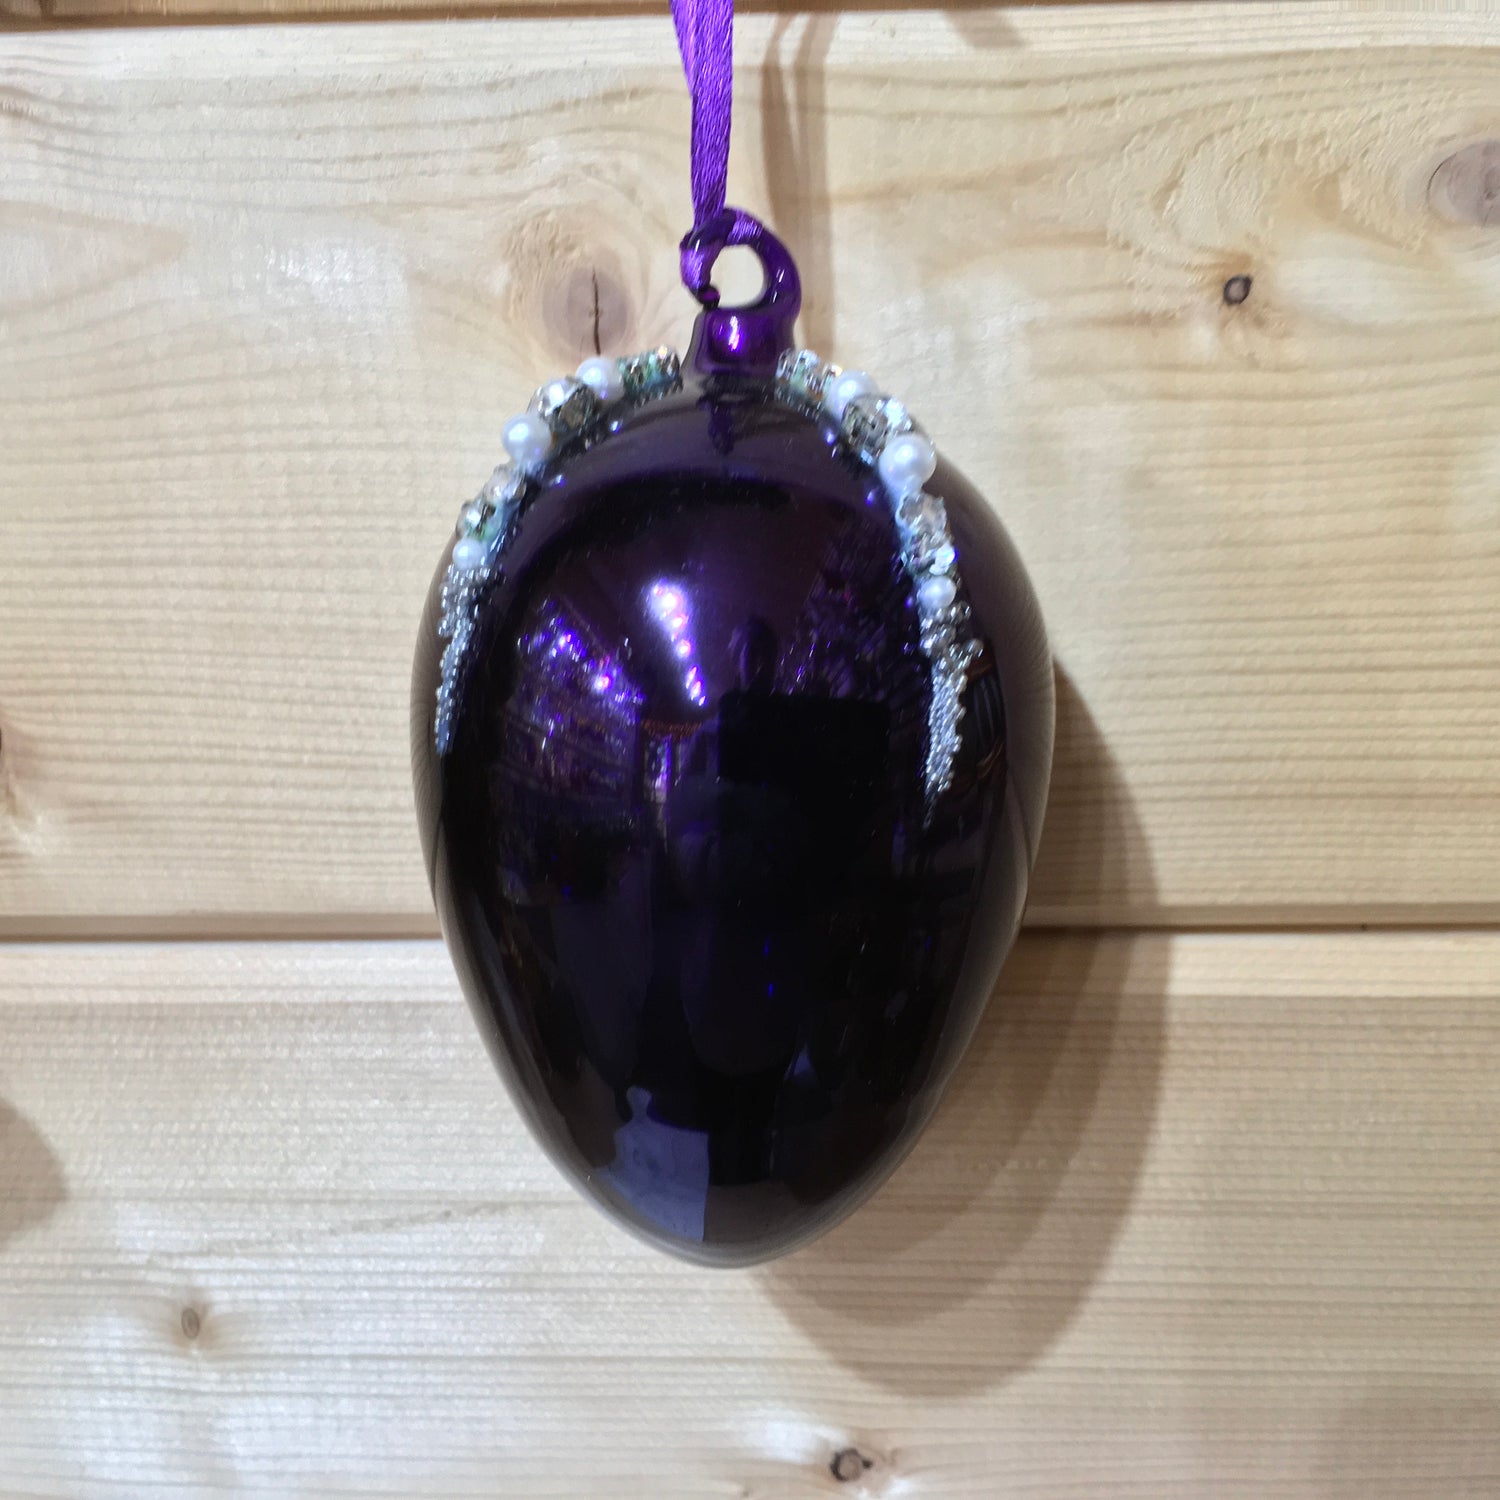 This shiny purple egg shape Christmas ornament is made from glass and decorated with beads, pearls and diamonte.